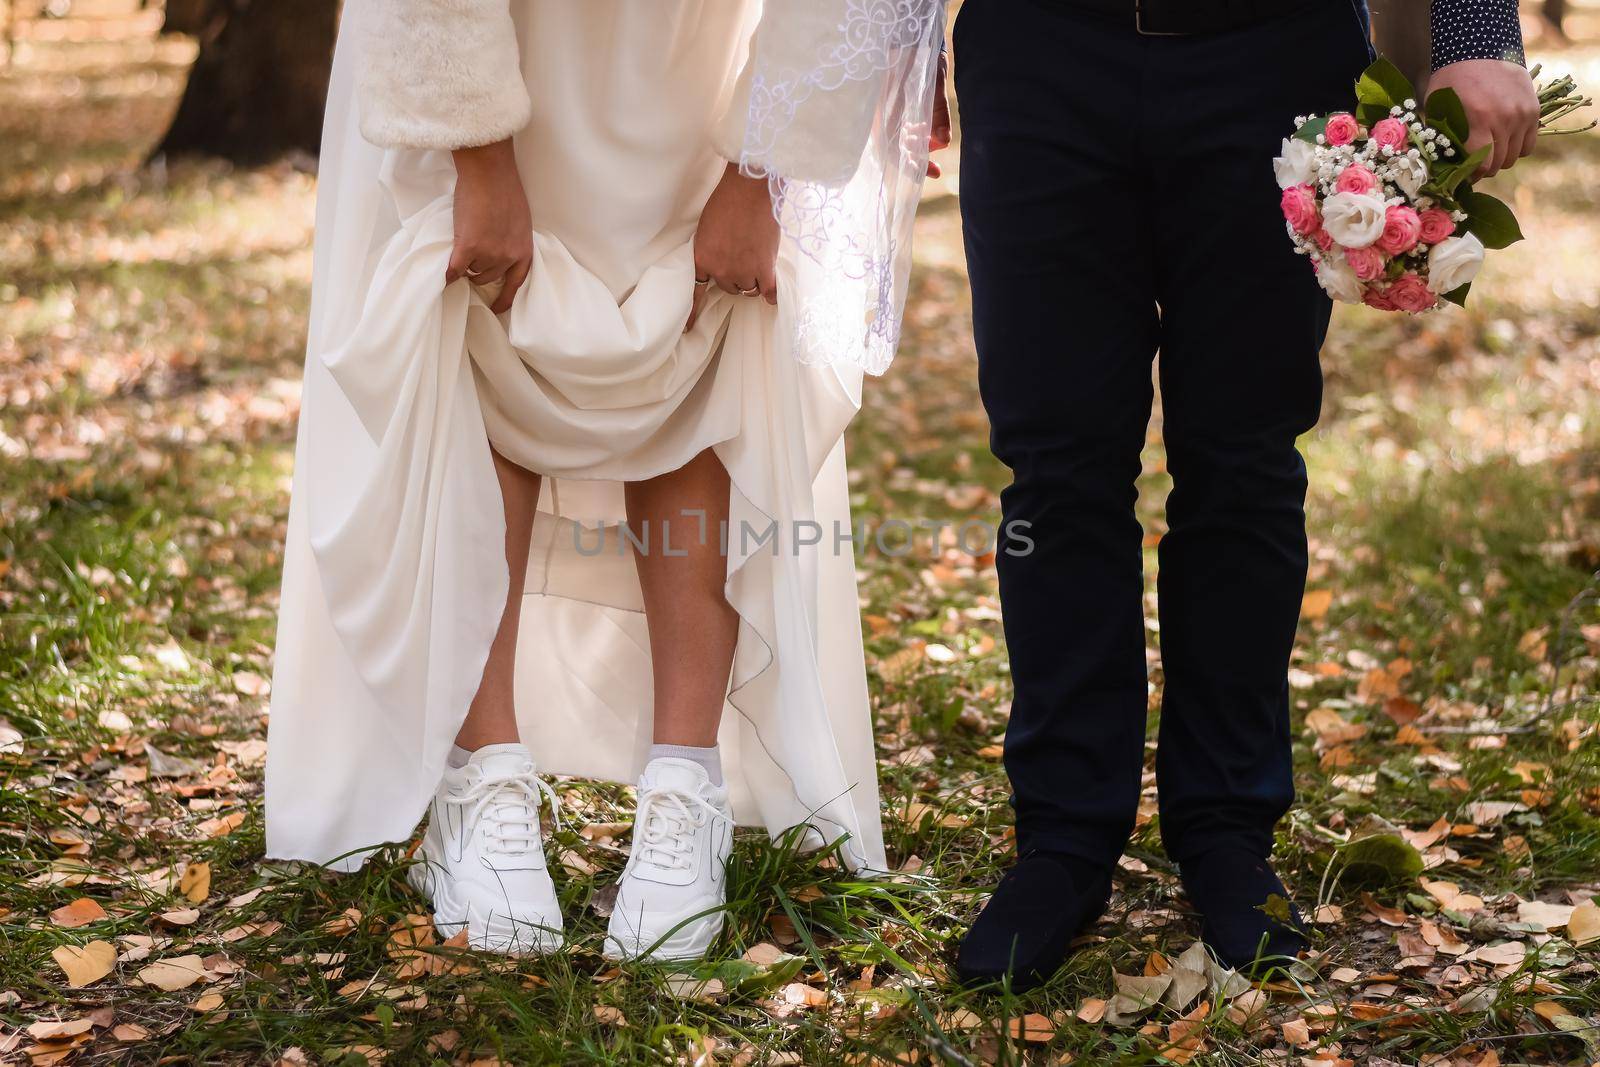 the bride and groom with a bouquet of flowers in fall in the park. the bride lifted her skirt, showing white sneakers.